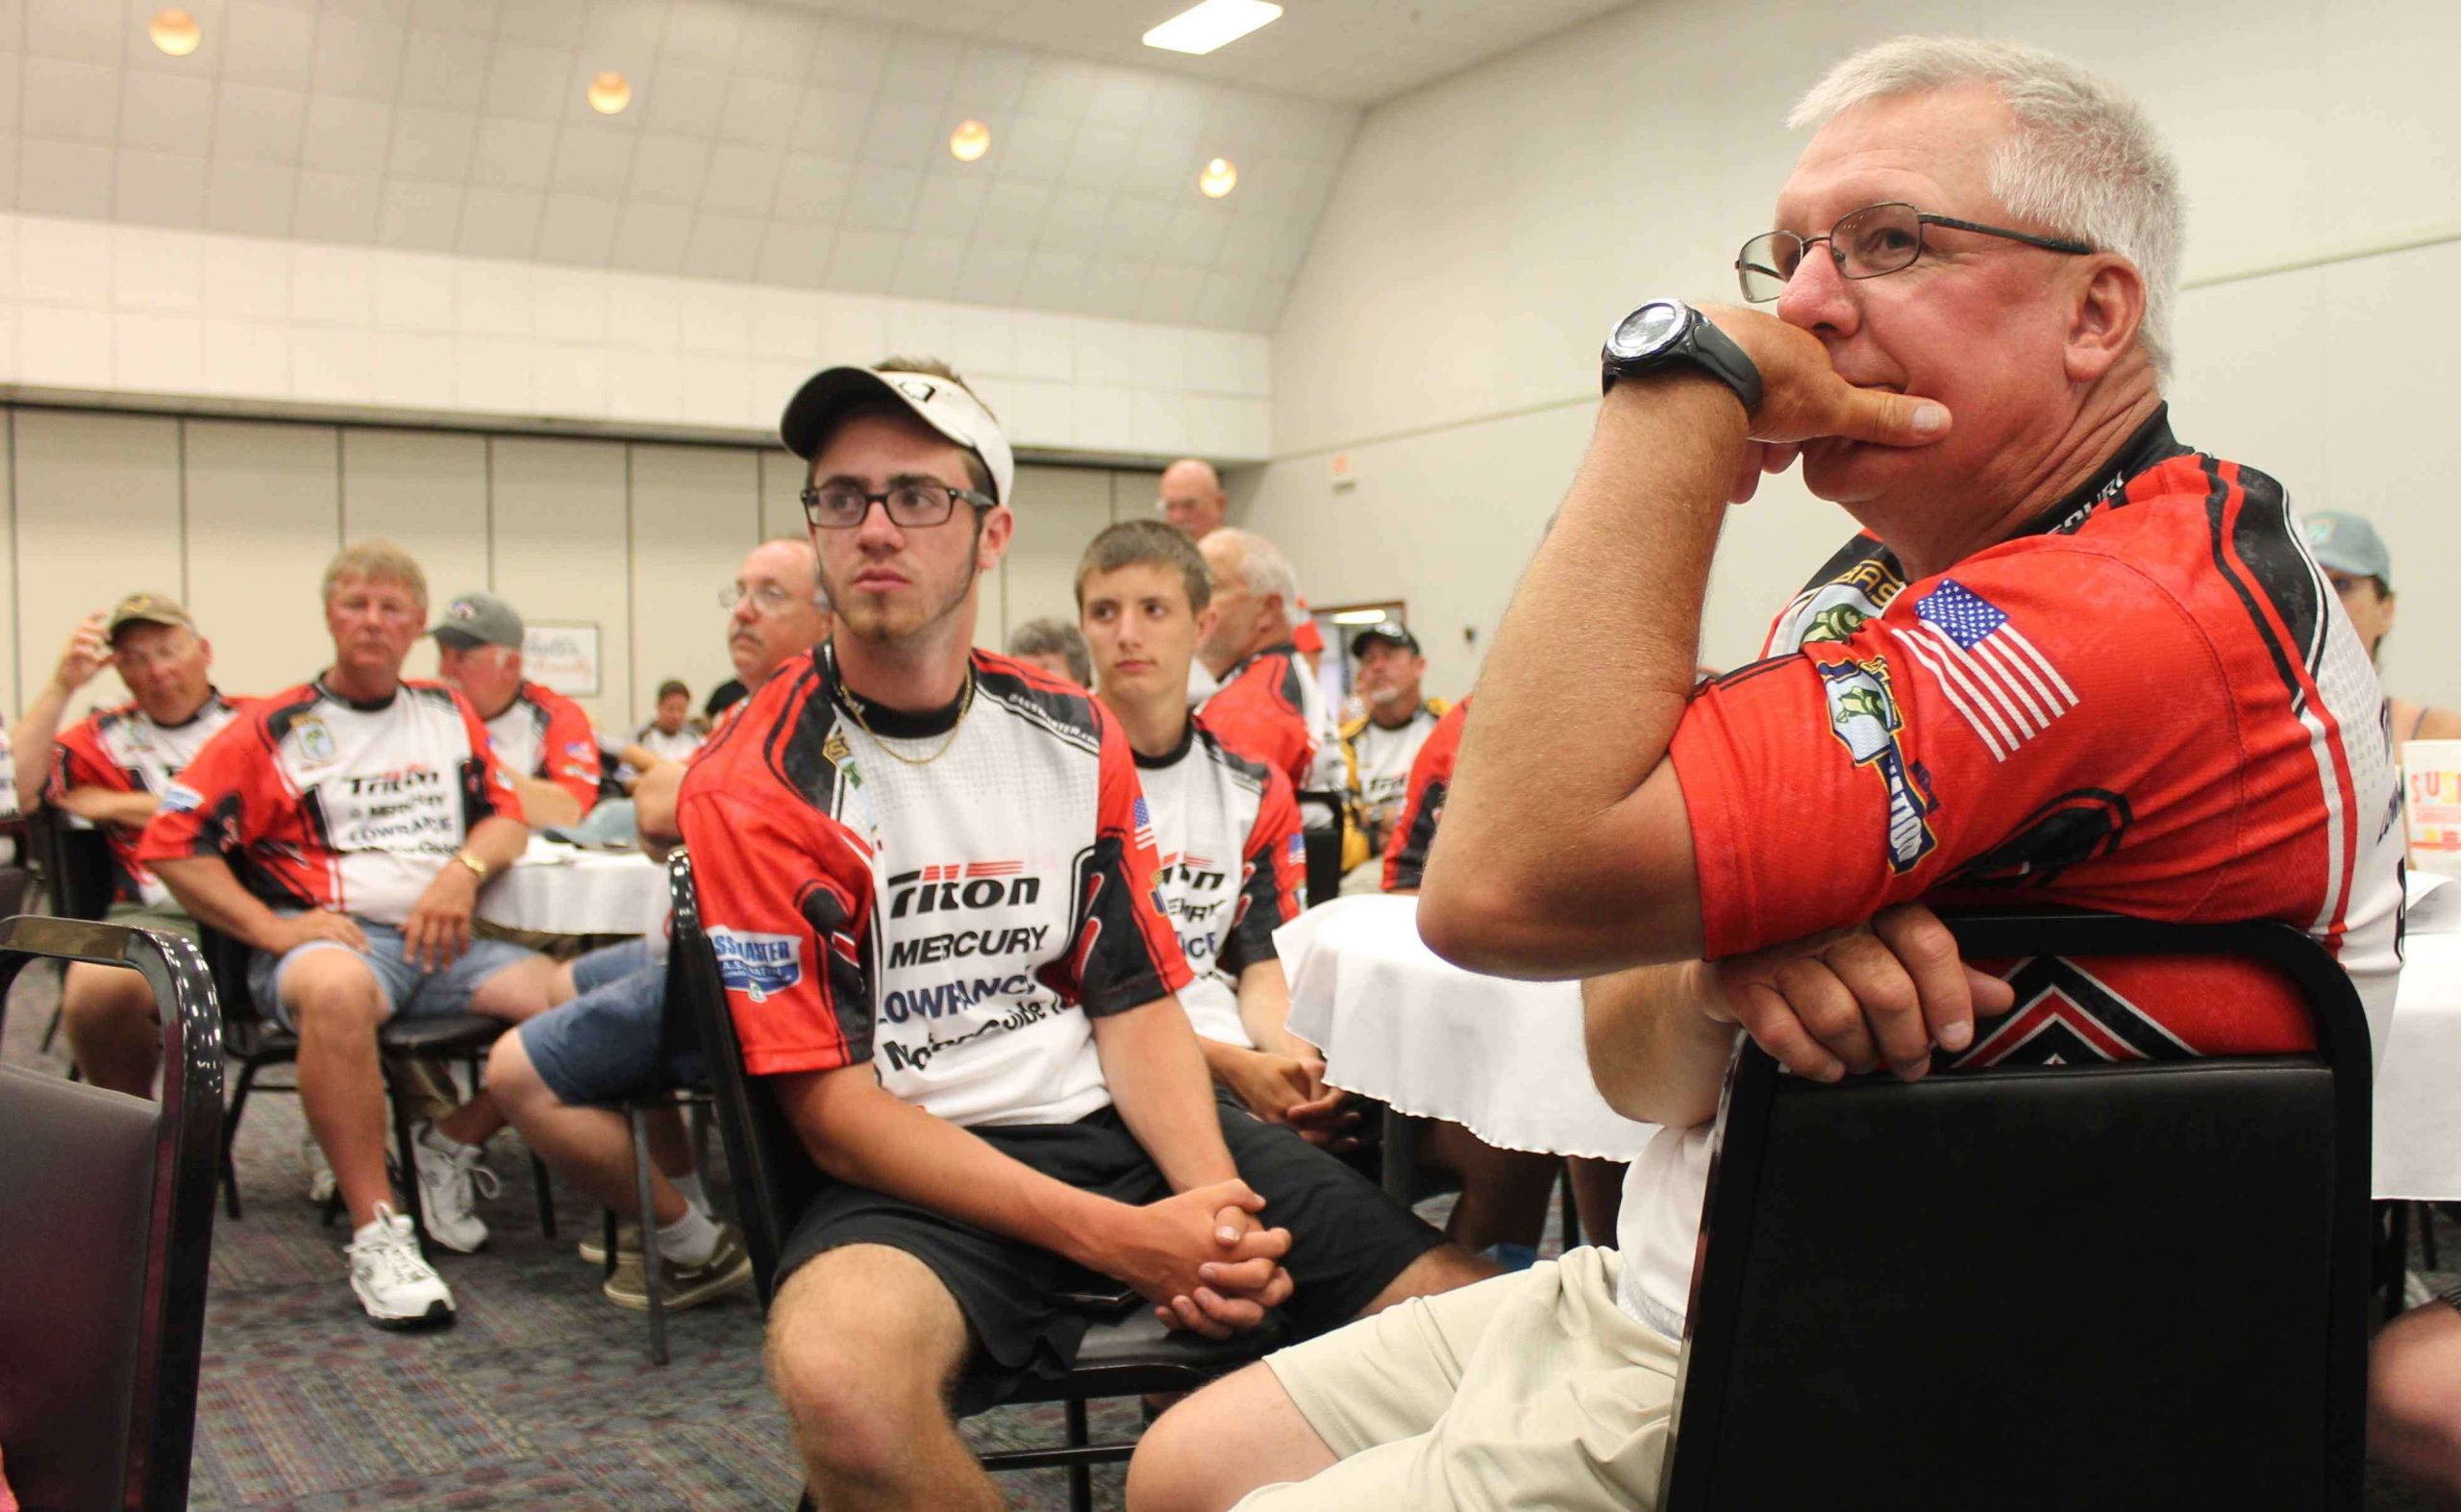 Missouri anglers Gary Soske (foreground) and Bryce Soske (right) listen intently as Stewart covers the tournament rules.
